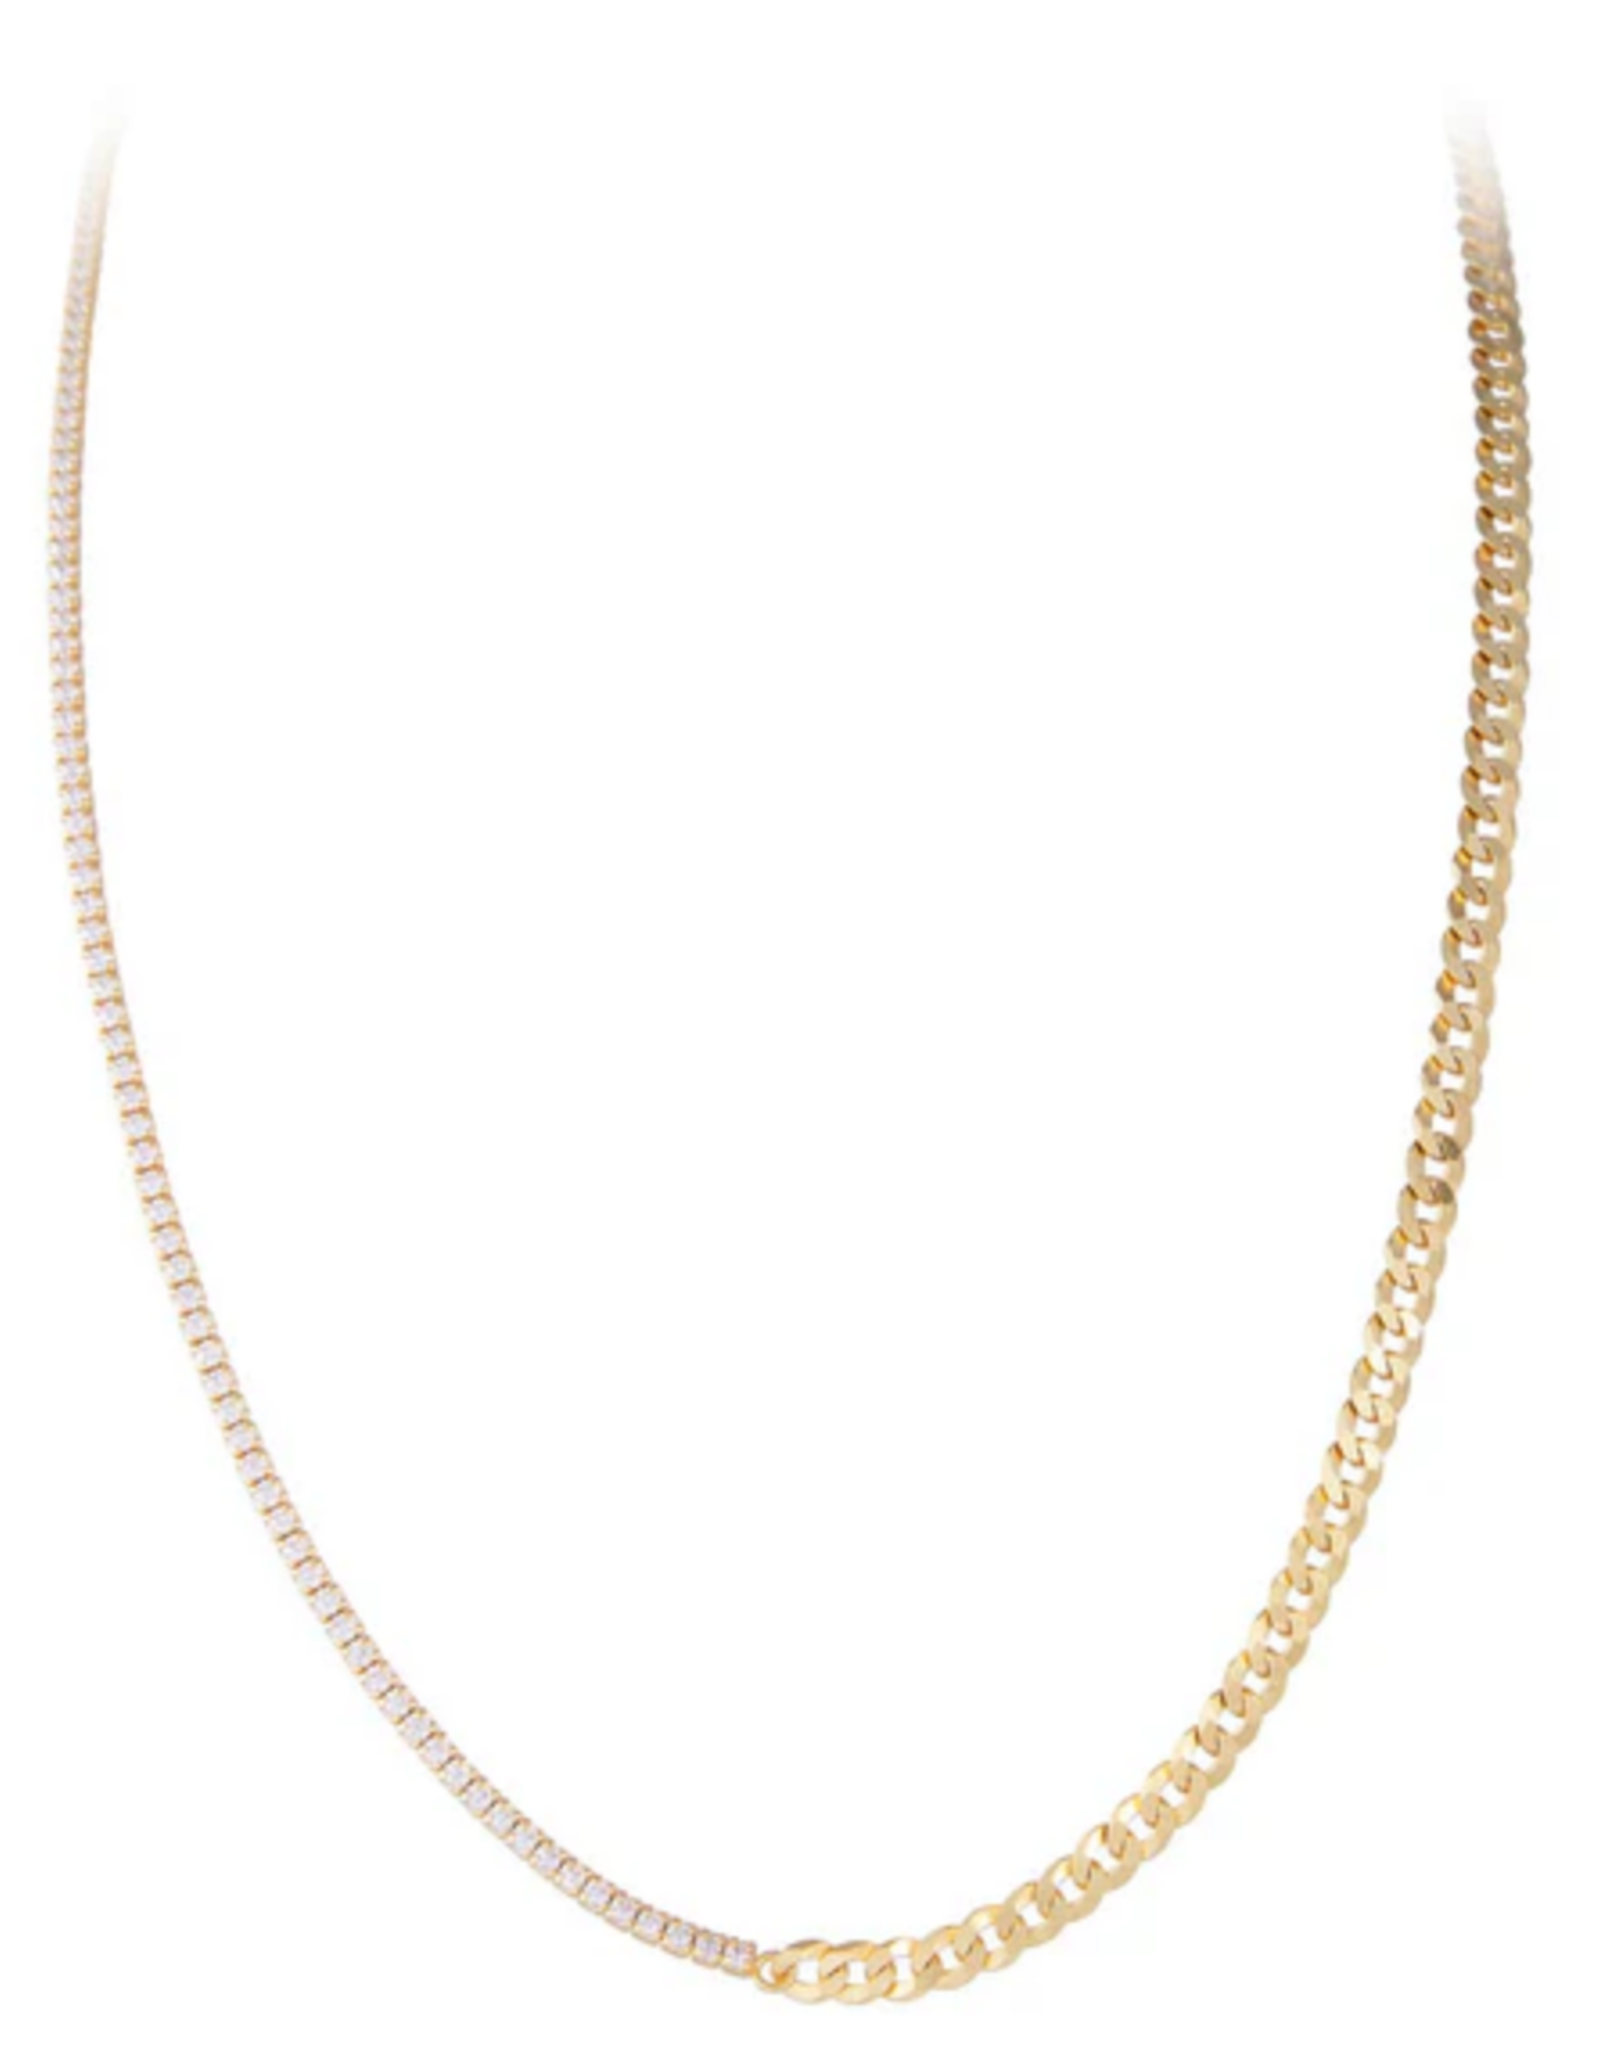 FAIRLEY TENNIS CHAIN NECKLACE